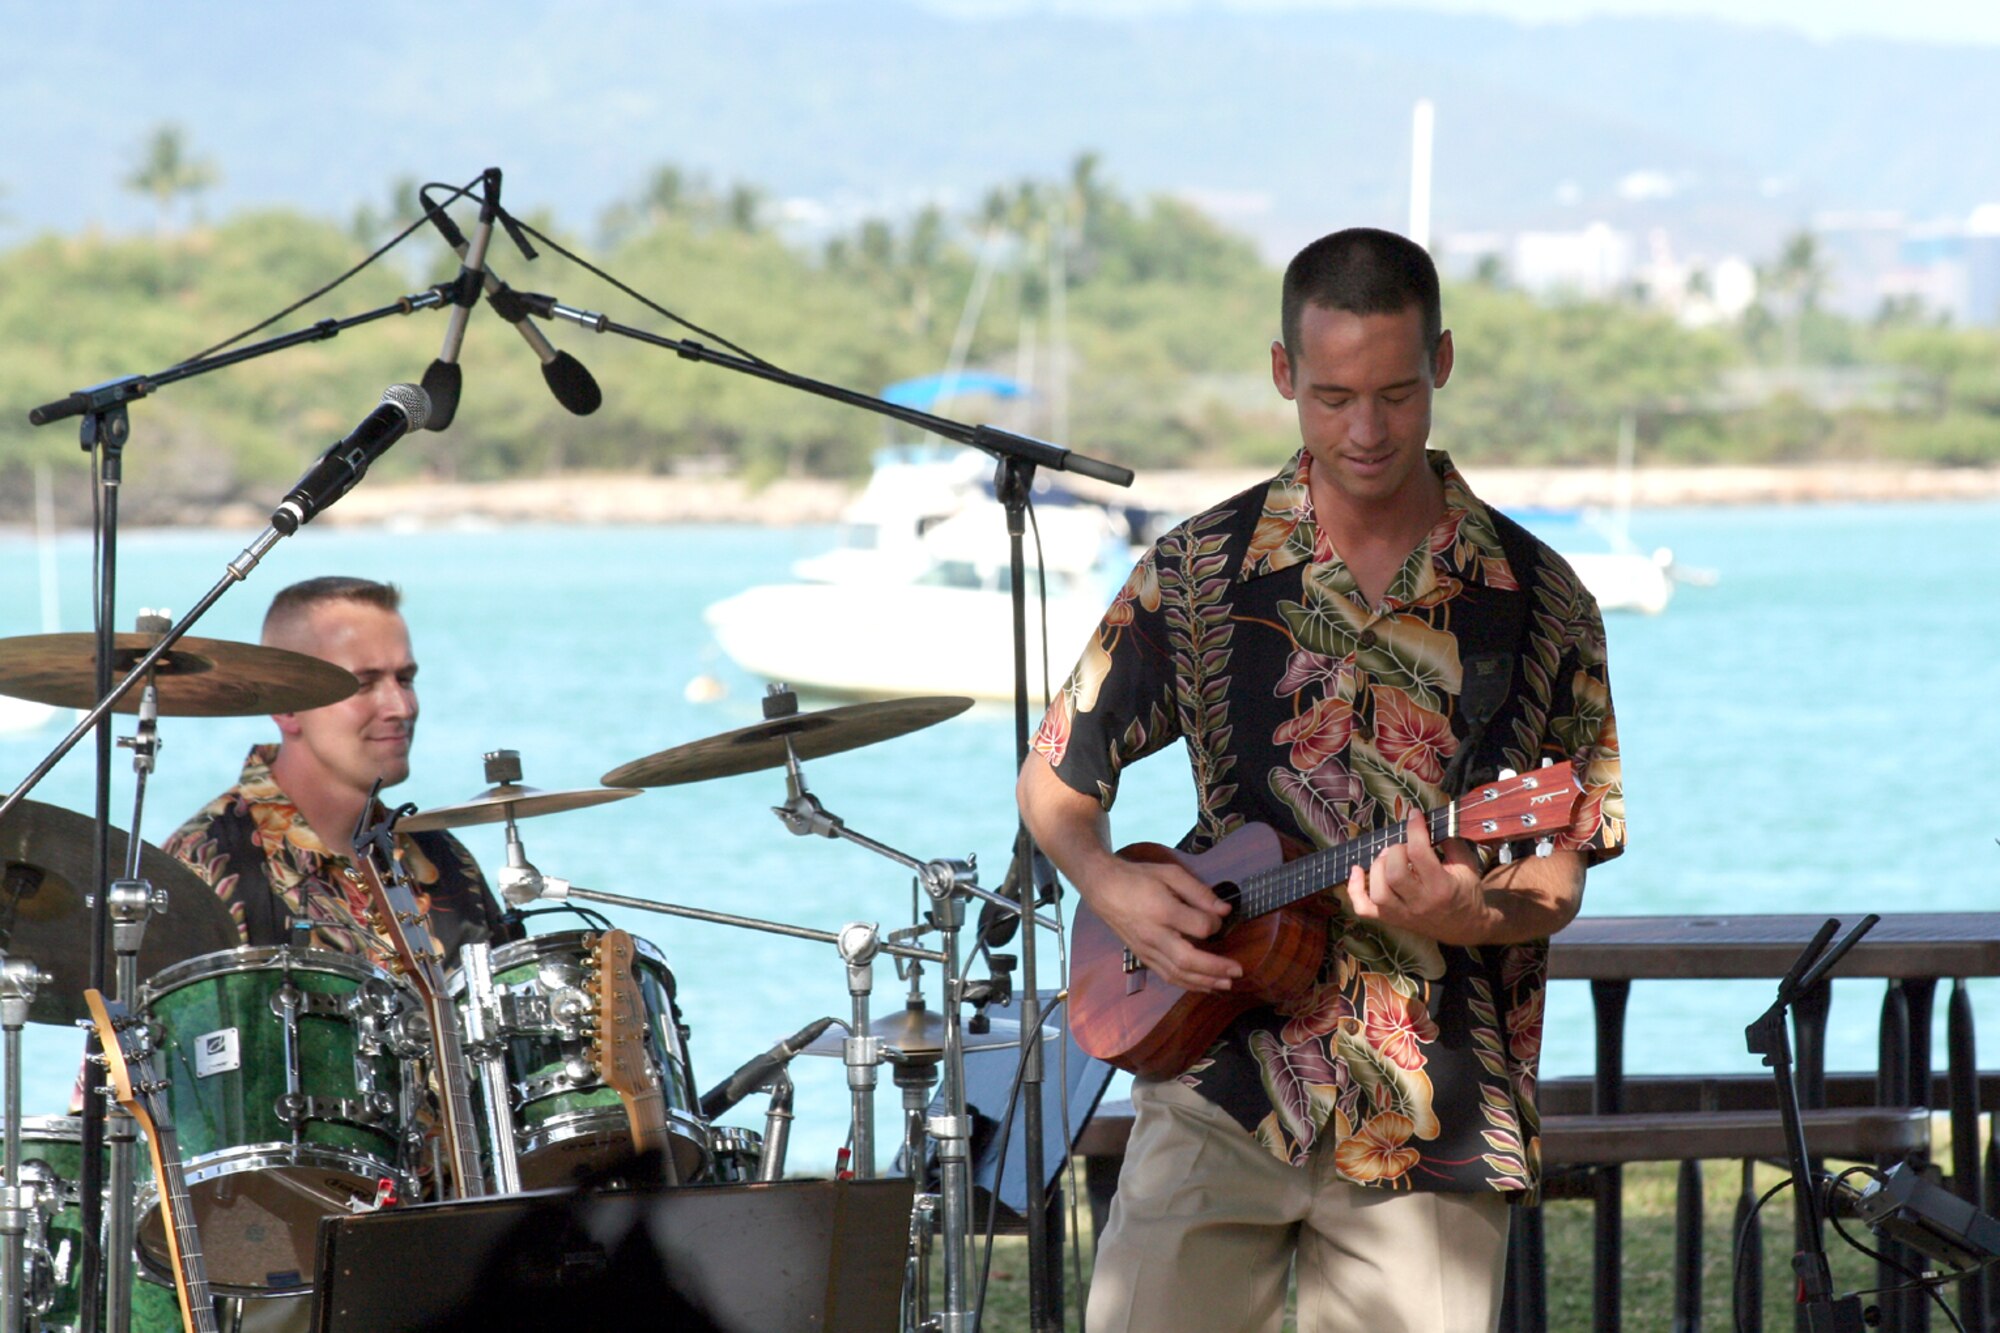 HICKAM AIR FORCE BASE, Hawaii – U.S. Air Force Staff Sergeant David E. Vittetoe, drummer  and Staff Sergeant John Kukan, guitarist, members of the Air Force Band of the Pacific, ‘Hana Hou’, perform here May 18 during a concert hosted by Col. J.J. Torres, 15th Airlift Wing commander.  Hana Hou’s performances delight military and civilian audiences throughout Hawaii and the Pacific.  (US Air Force photo/ Master Sgt. Cherie McNeill)  